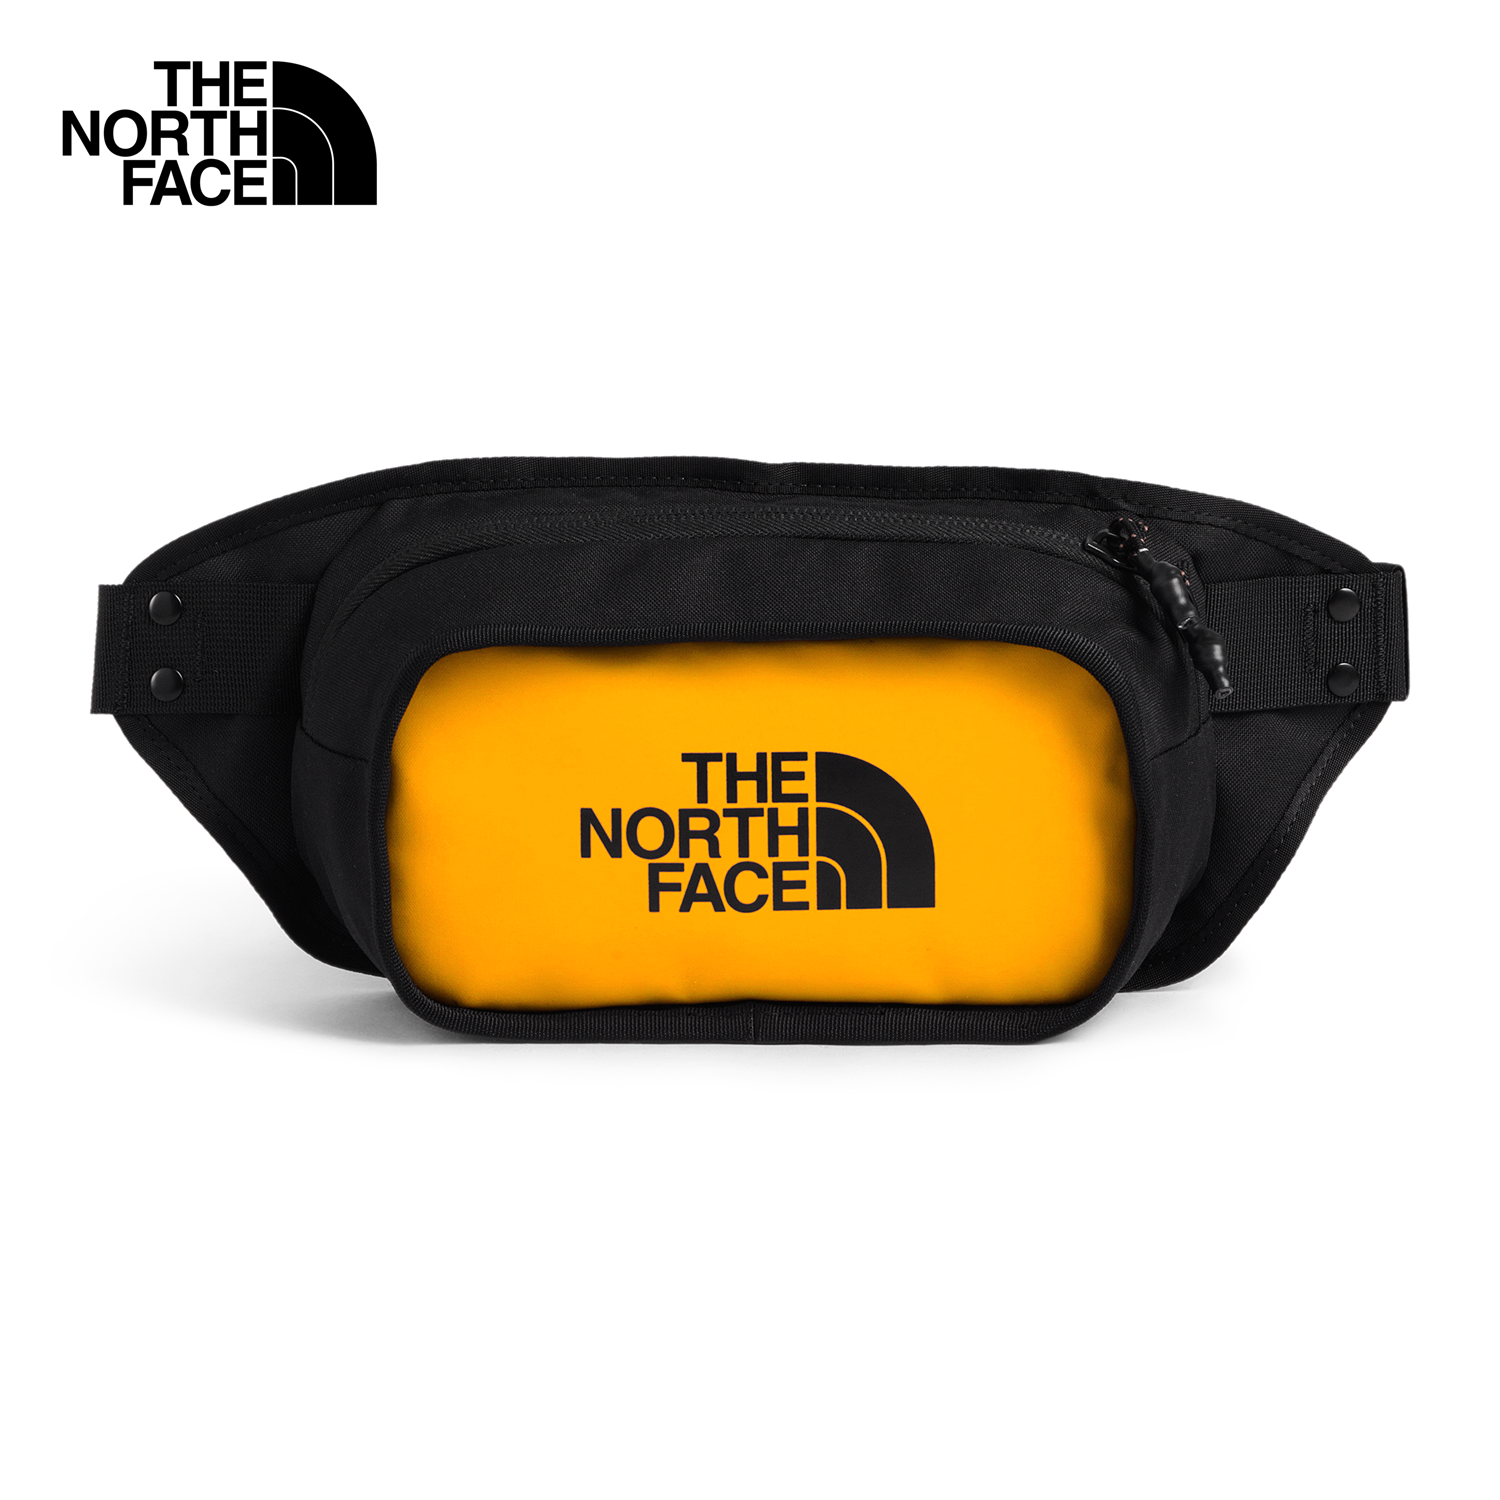 THE NORTH FACE EXPLORE HIP PACK ICON COLLECTION กระเป๋า กระเป๋าคาดเอว